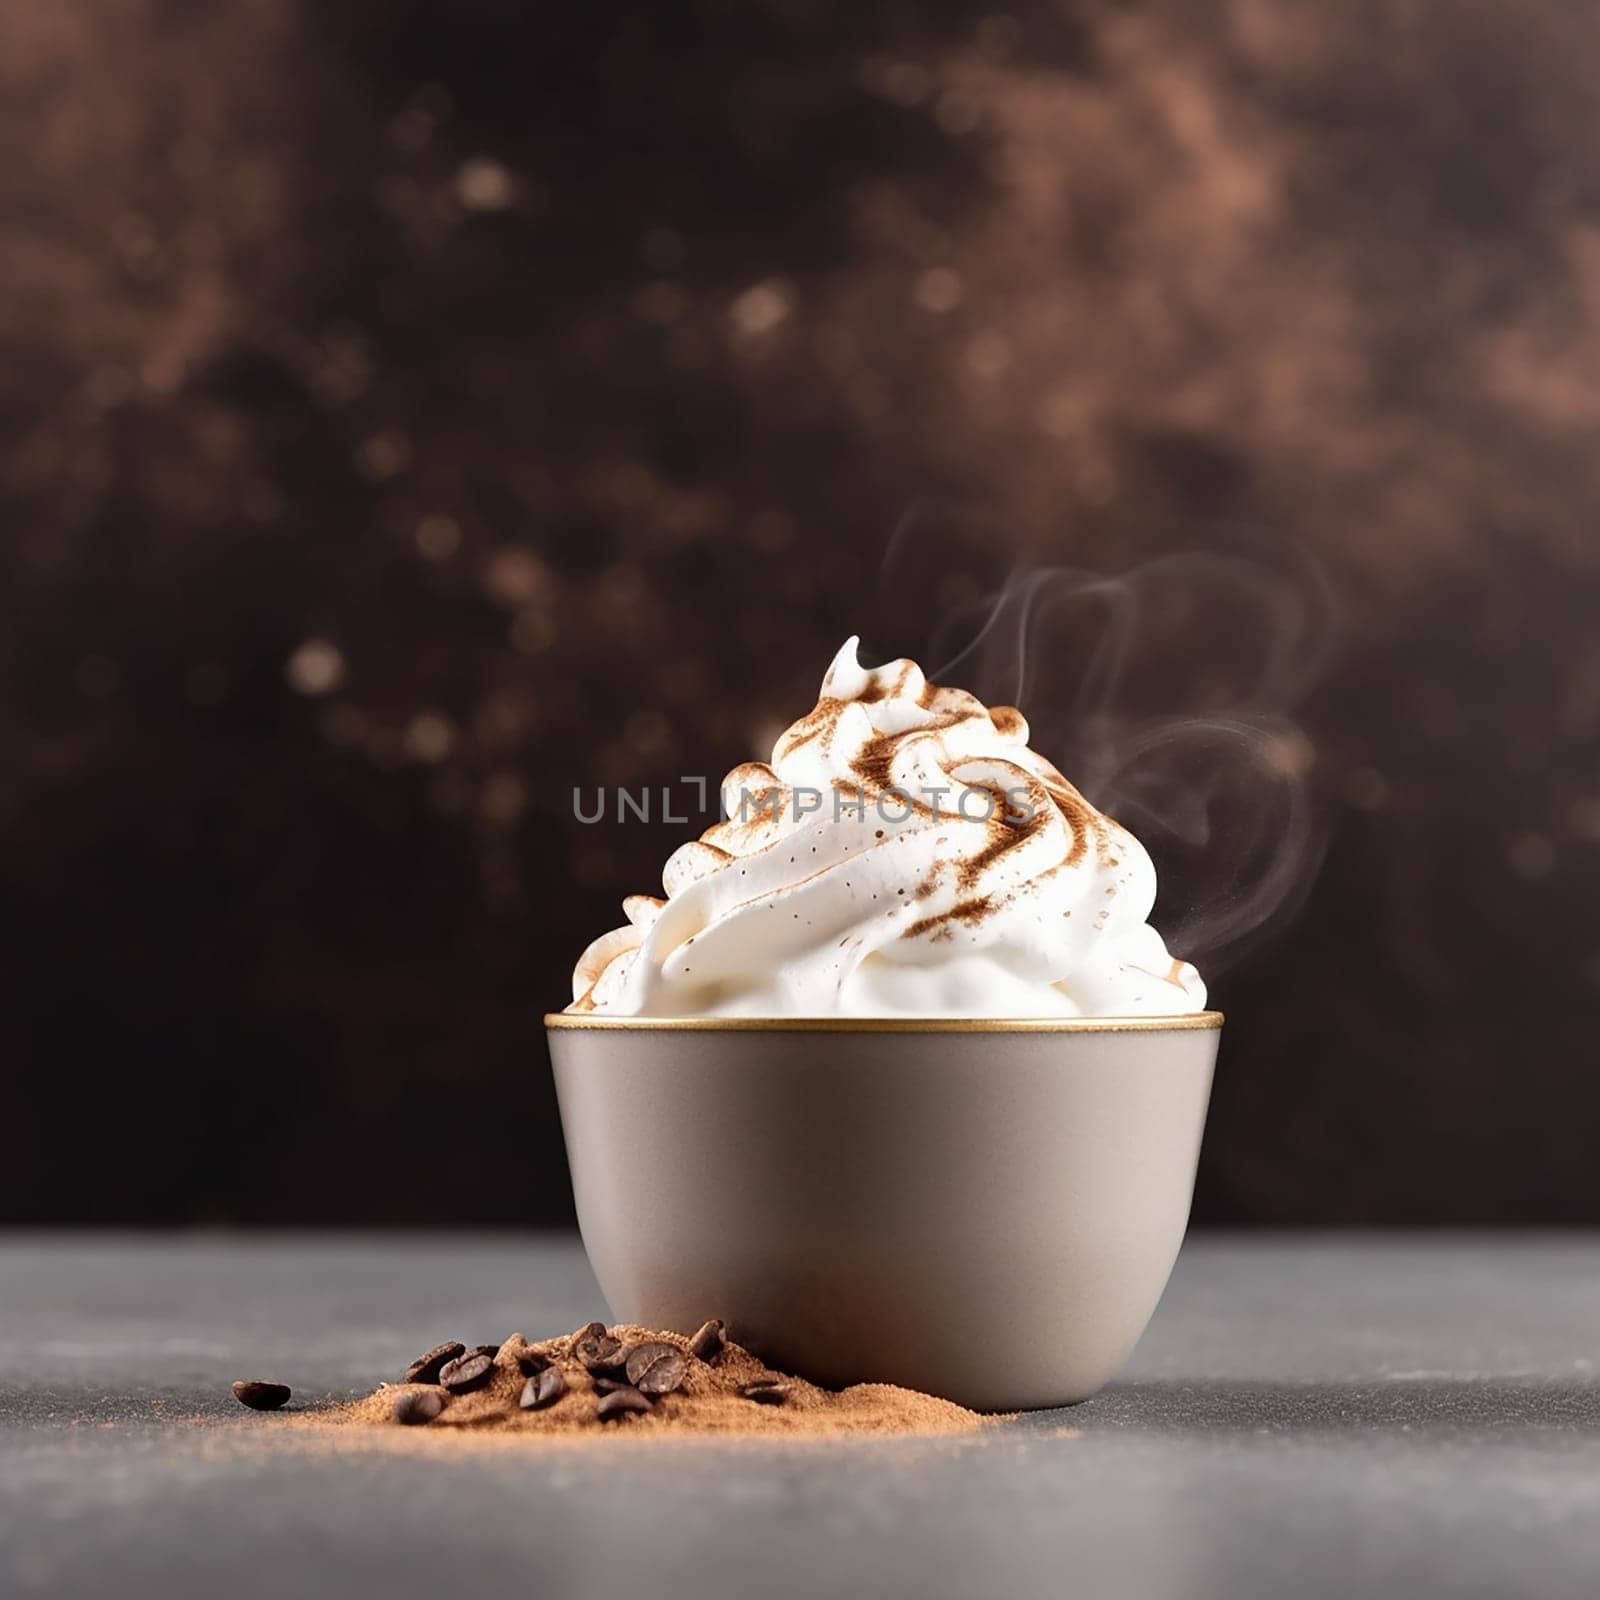 A warm cup of coffee topped with creamy whipped cream and sprinkled cocoa